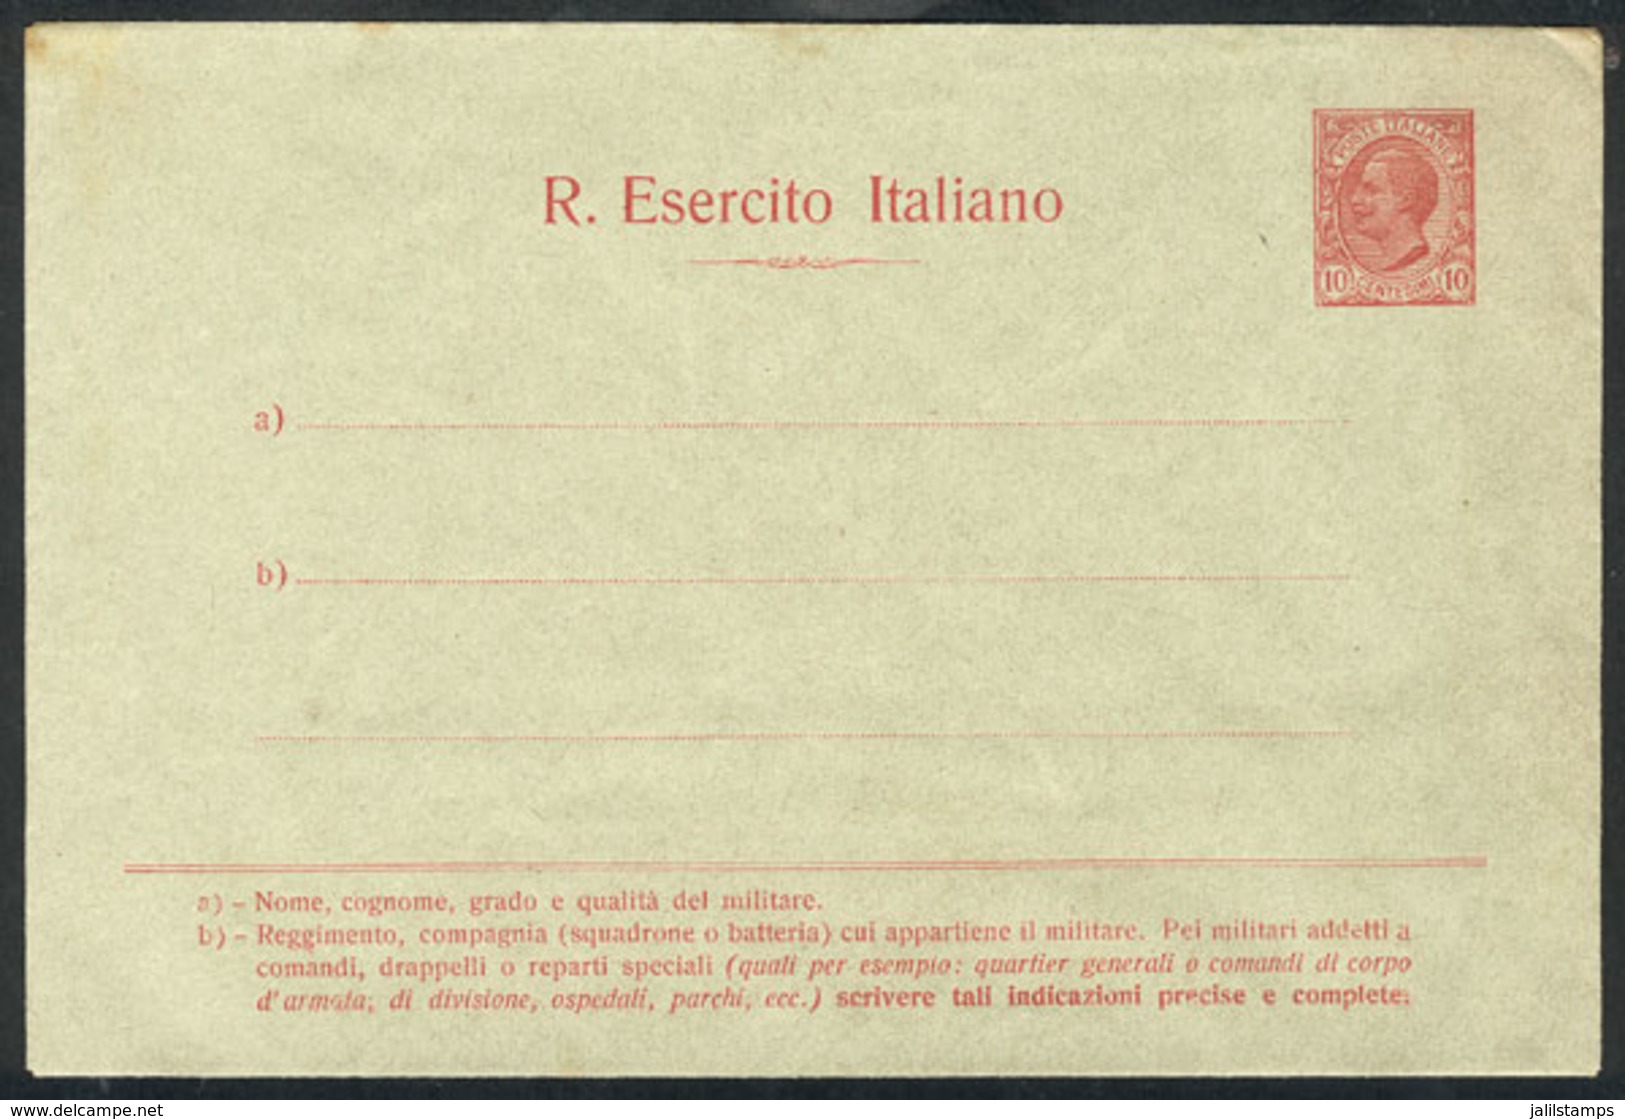 ITALY: 10c. Stationery Envelope Of The Army Of The Year 1915, Unused, VF Quality! - Entero Postal